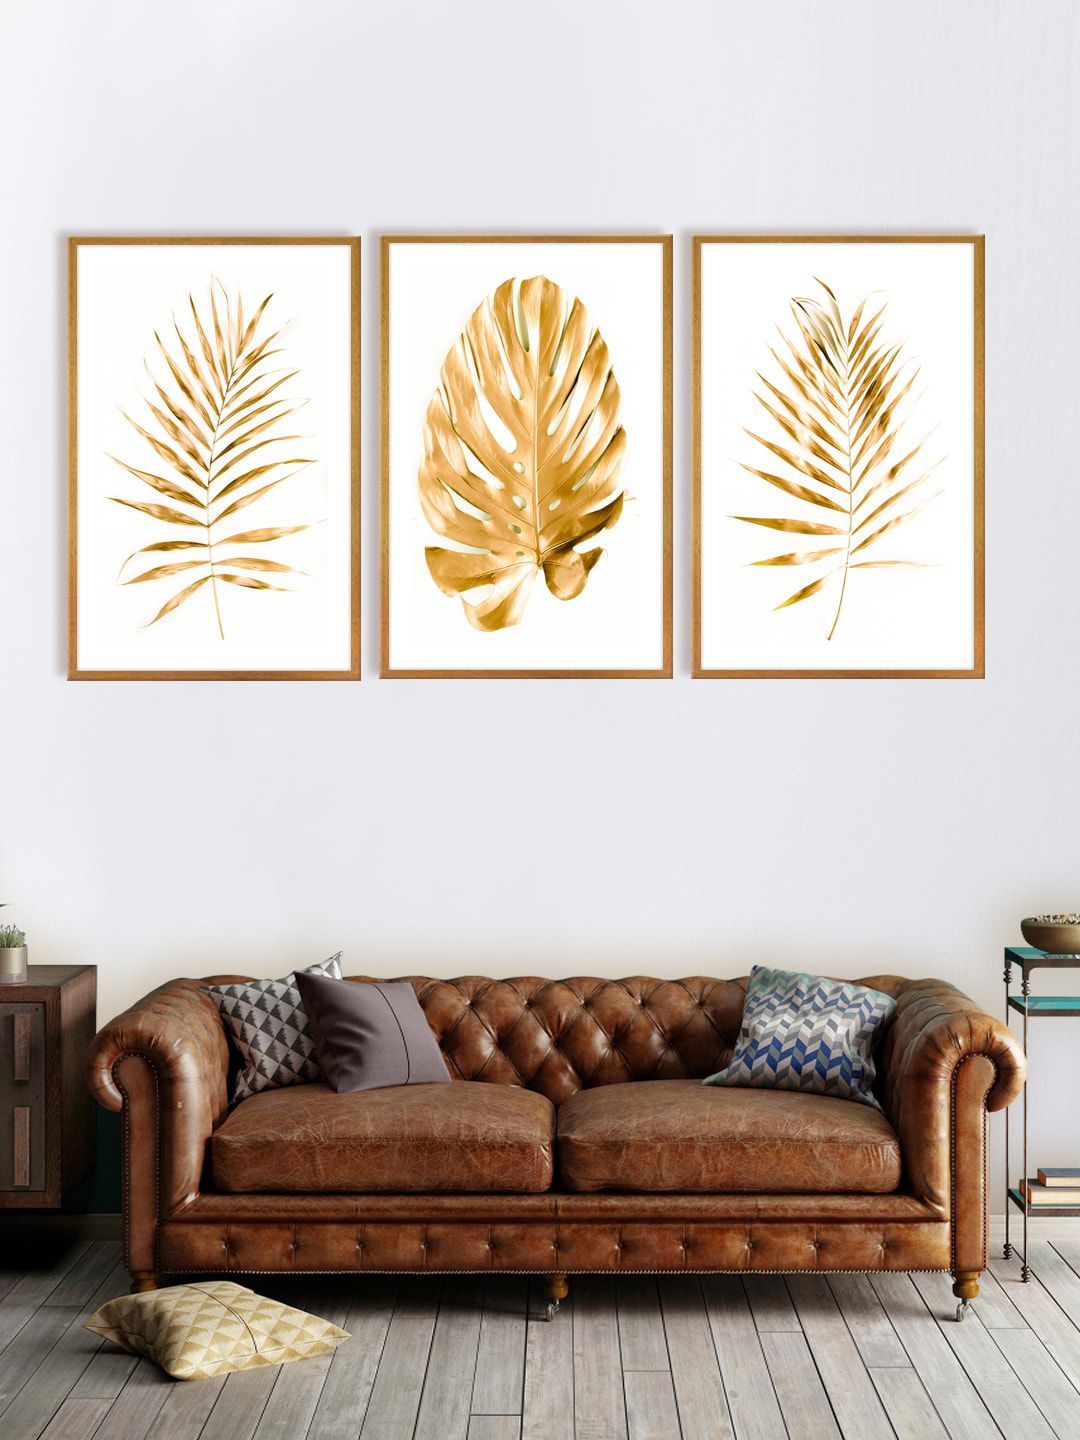 999Store Set Of 3 White & Gold-Toned Leaves Printed Wall Art Price in India